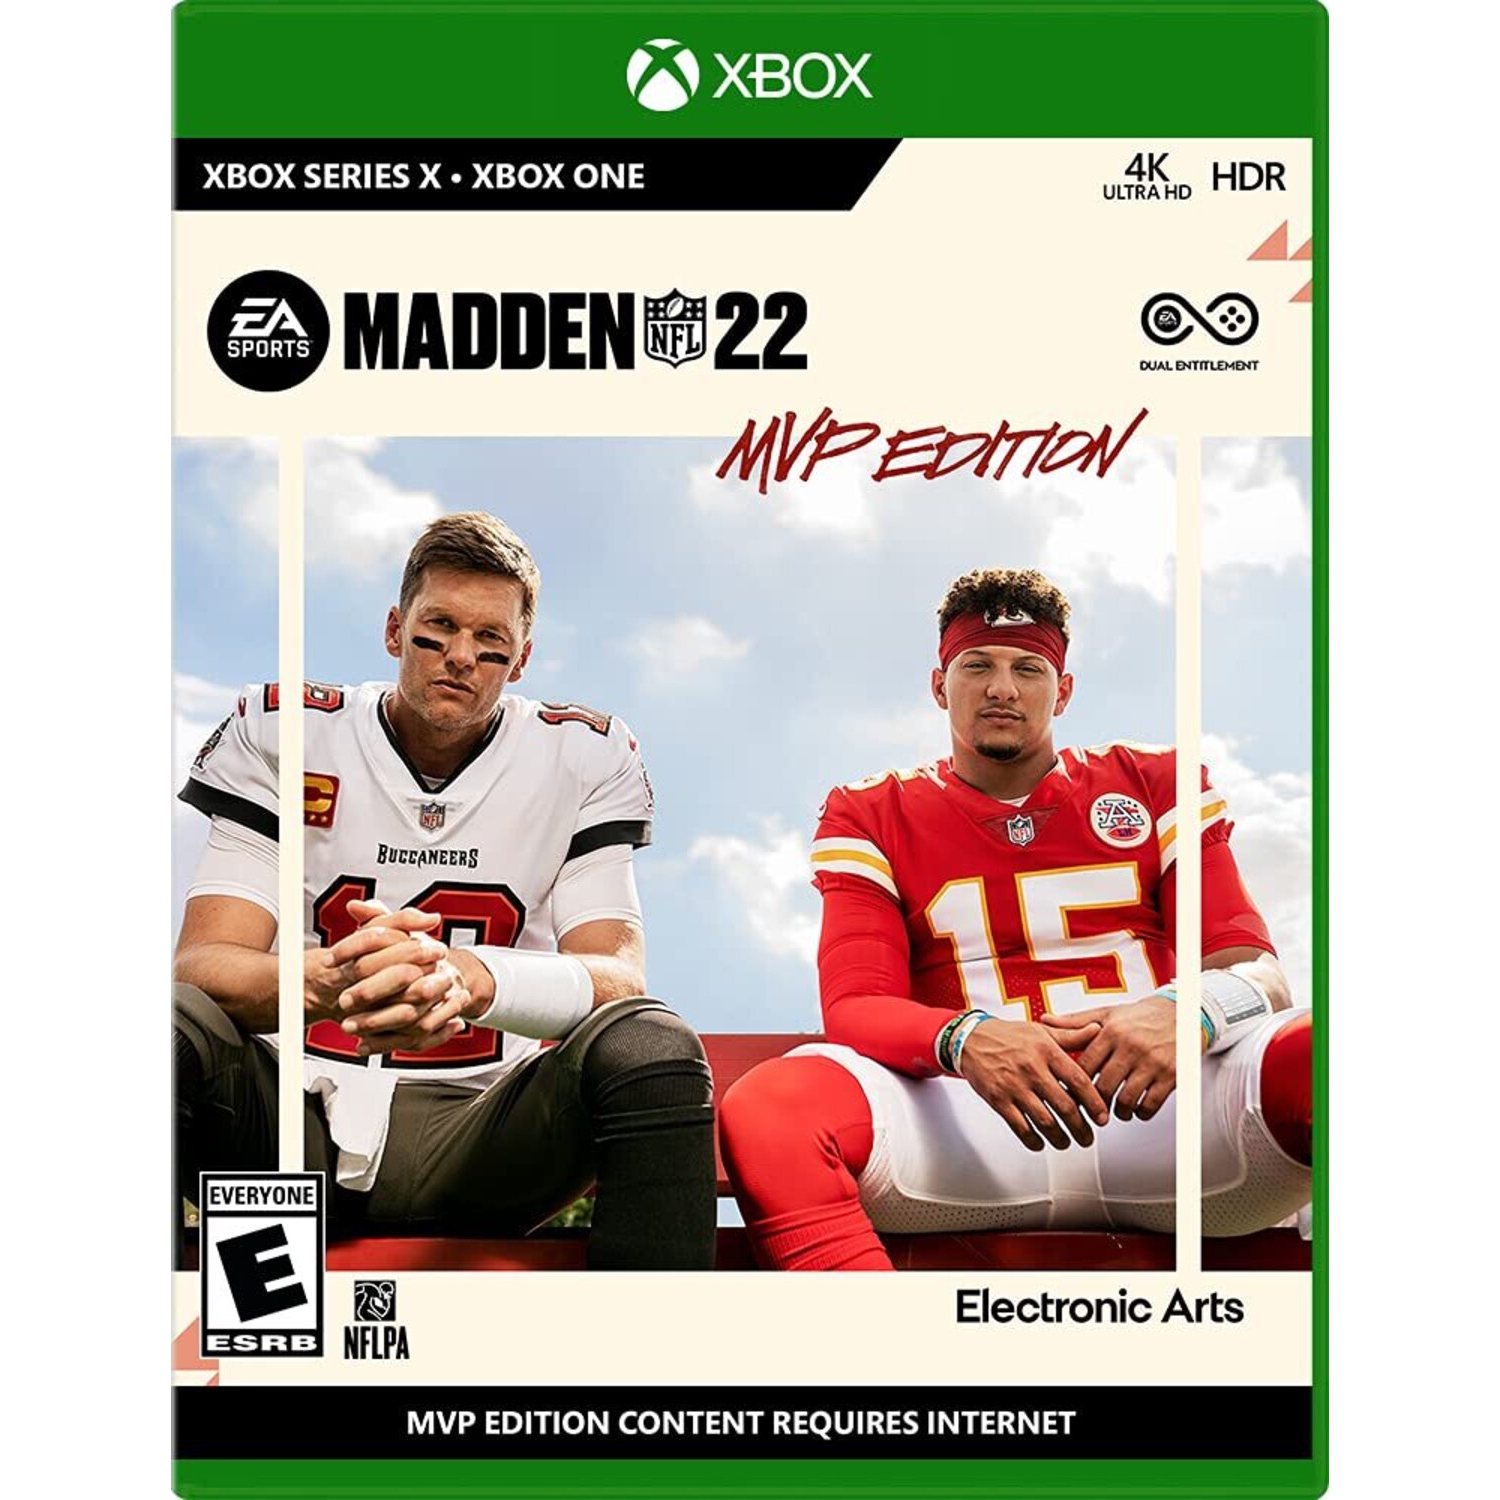 Madden NFL 22 MVP Edition for Xbox One and Xbox Series X [VIDEOGAMES]